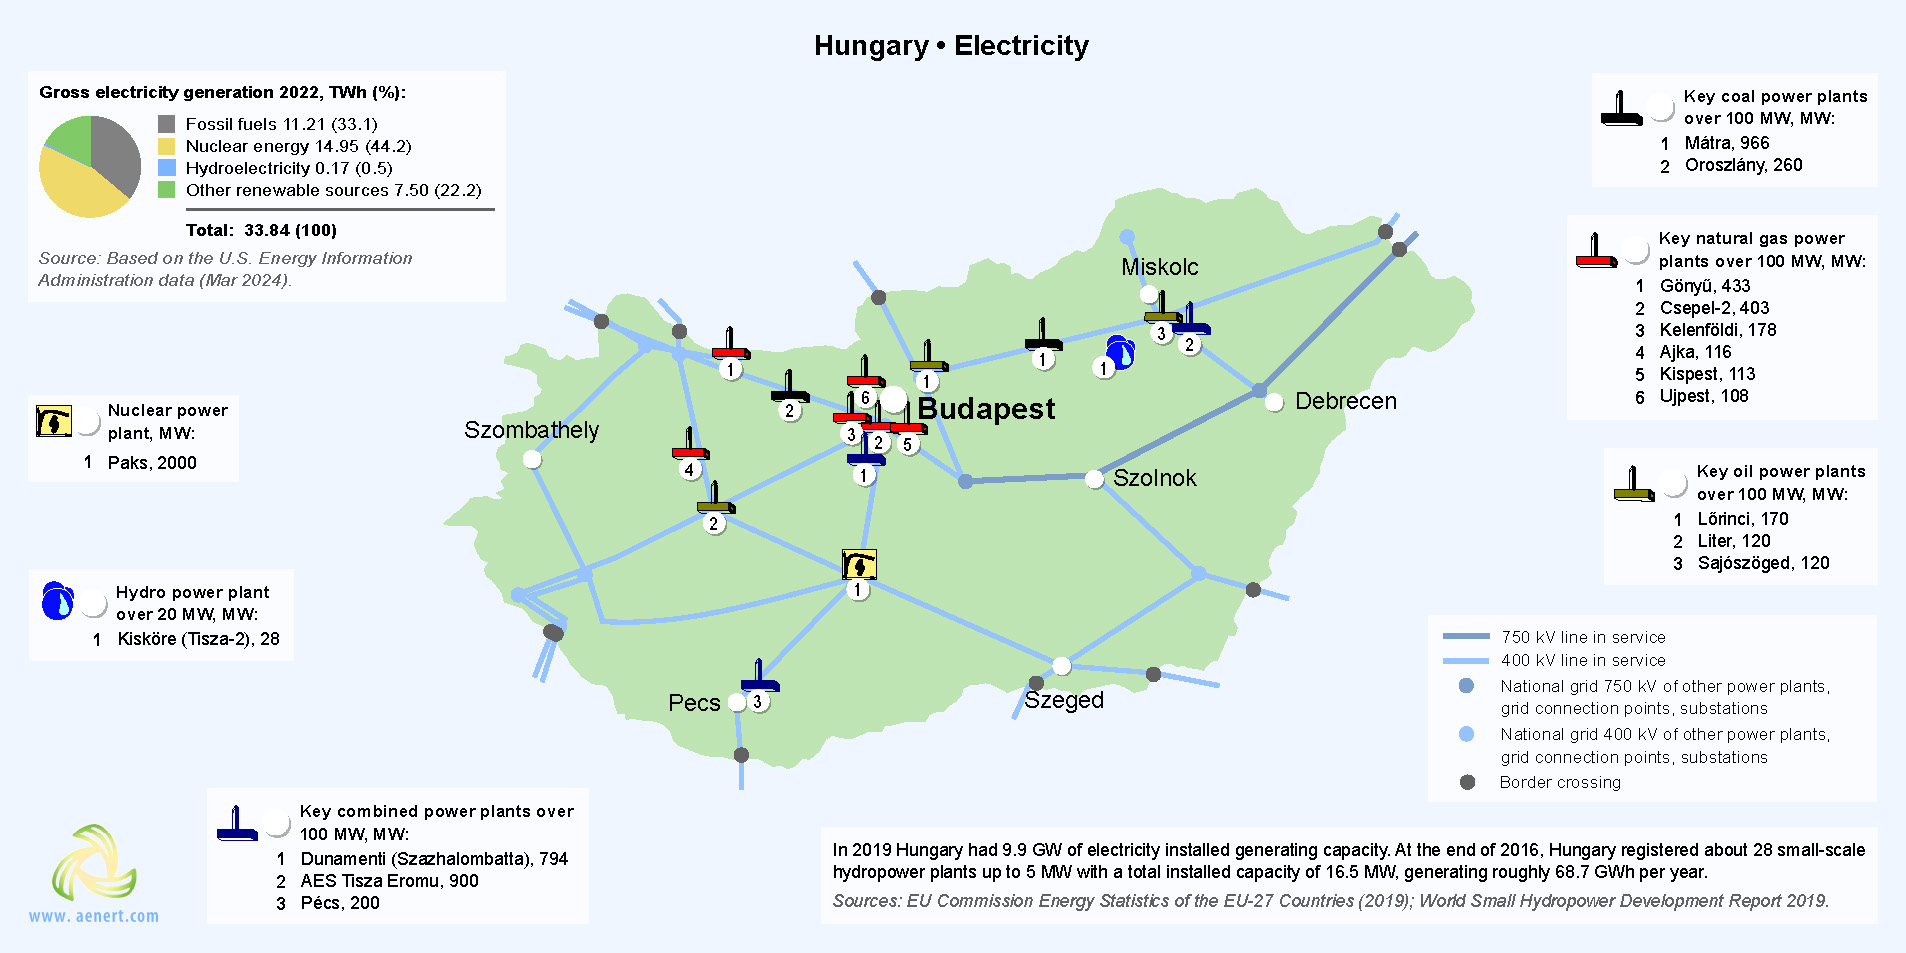 Map of power plants in Hungary